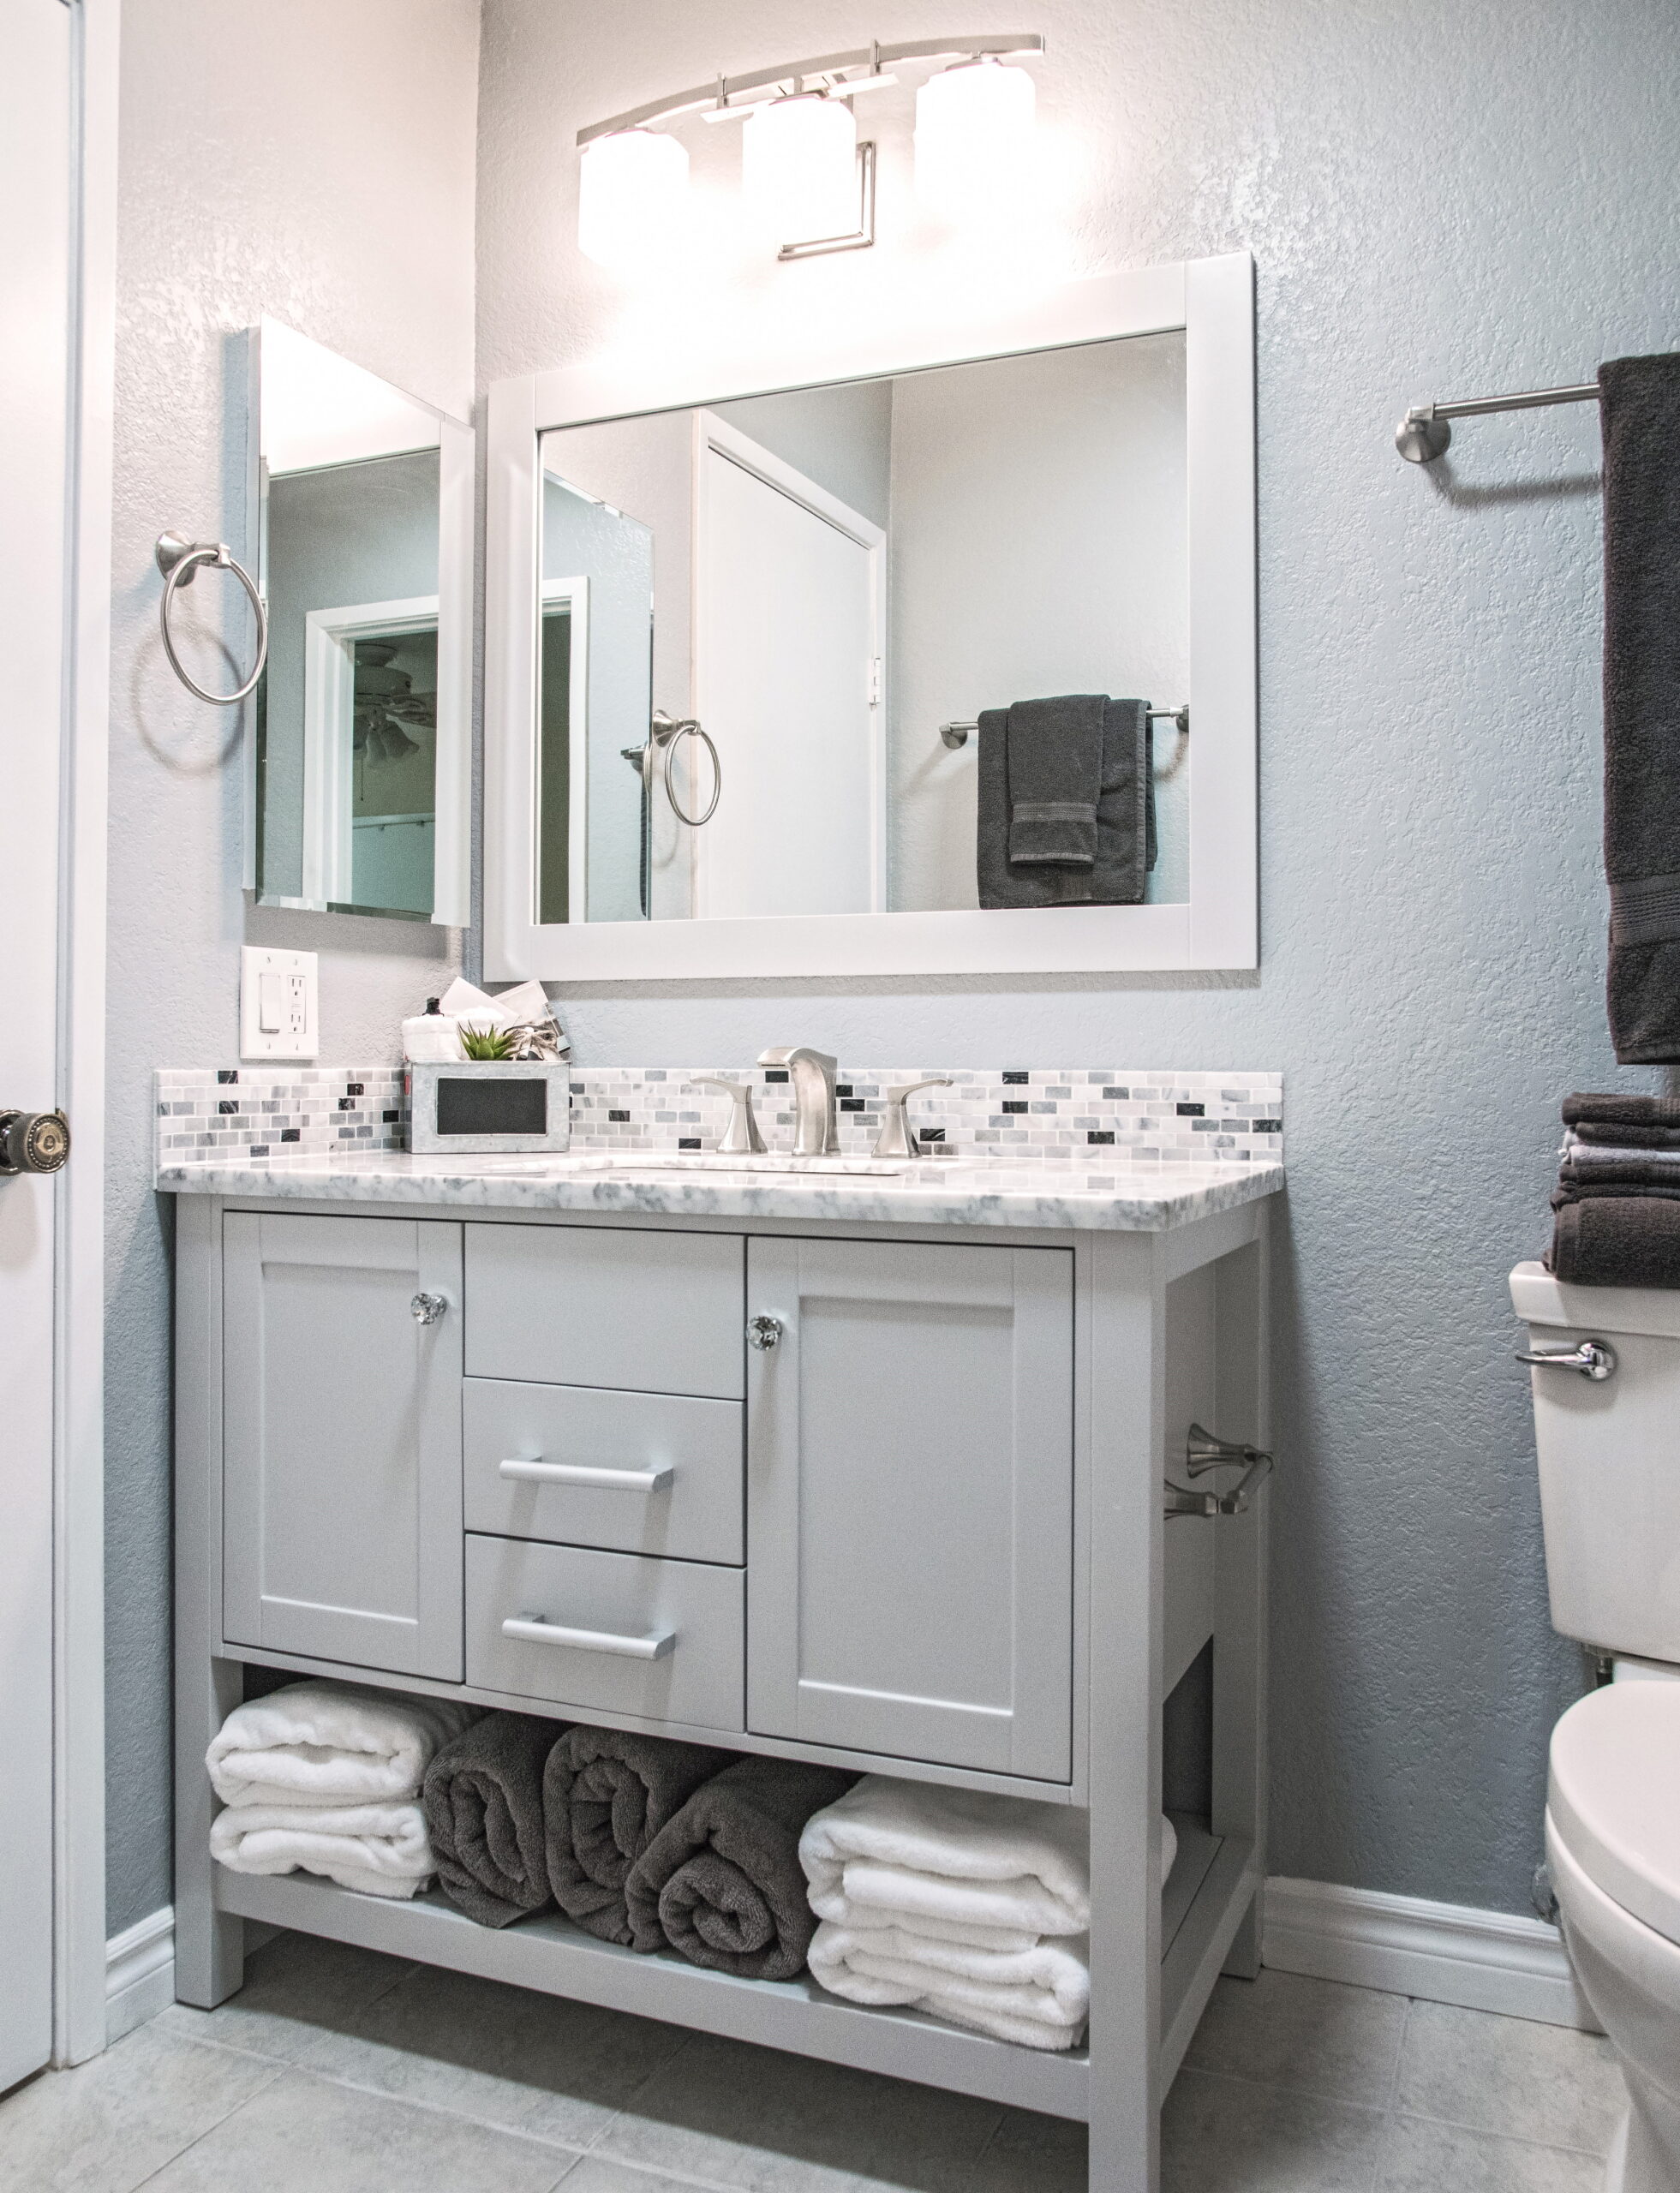 Use space efficiently while complementing your design with a vanity or cabinet with.